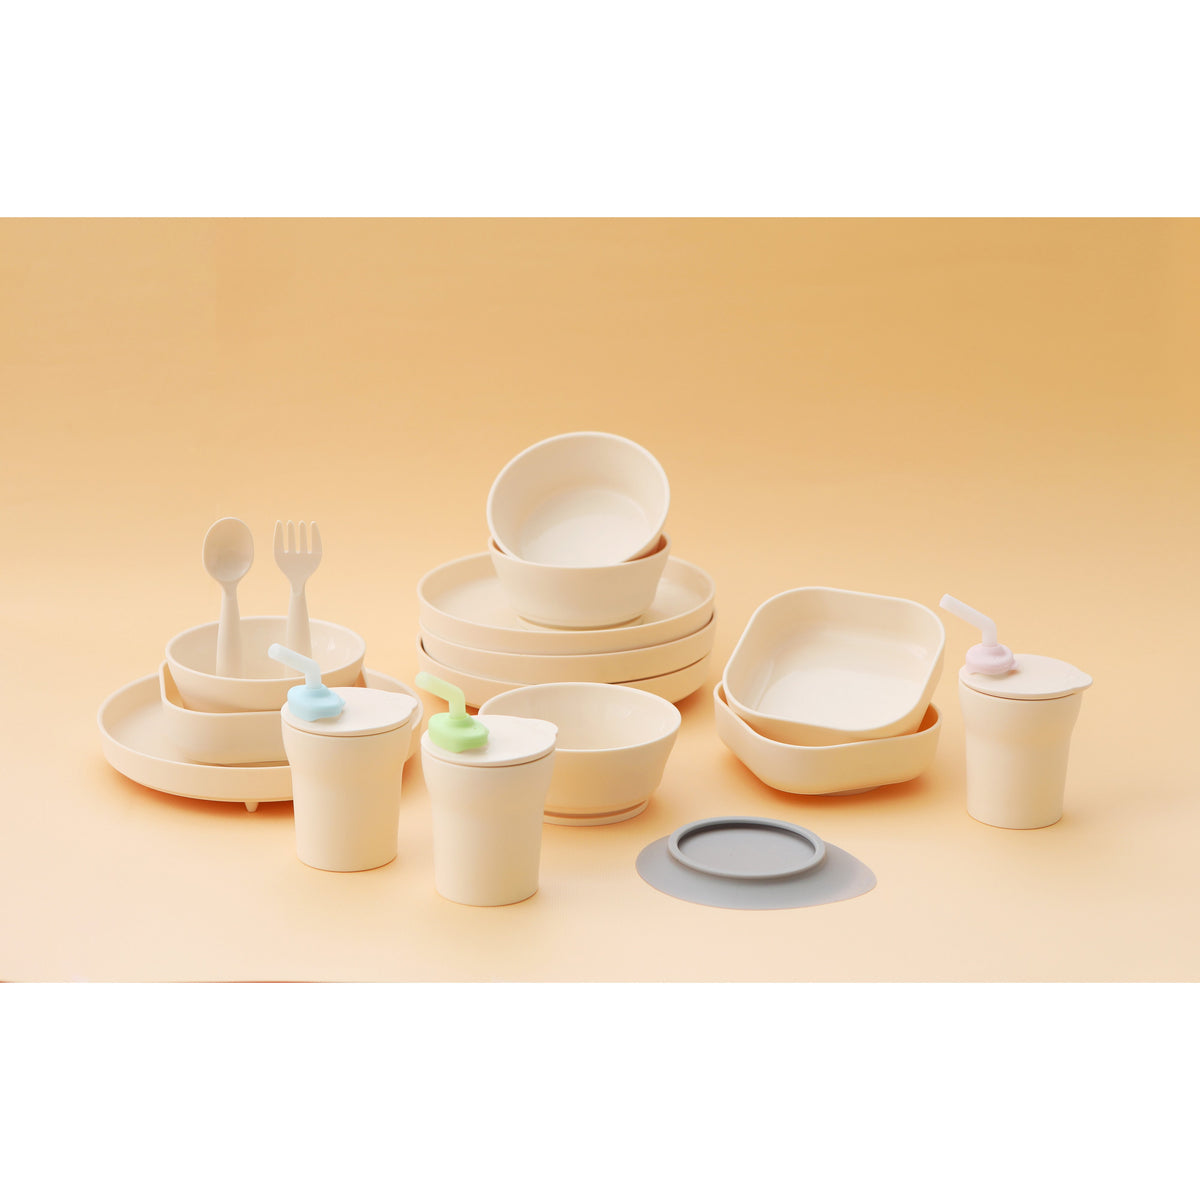 miniware-first-bite-set-pla-cereal-suction-bowl-vanilla-+-silicone-spoon-and-cover-in-cotton-keylime- (13)